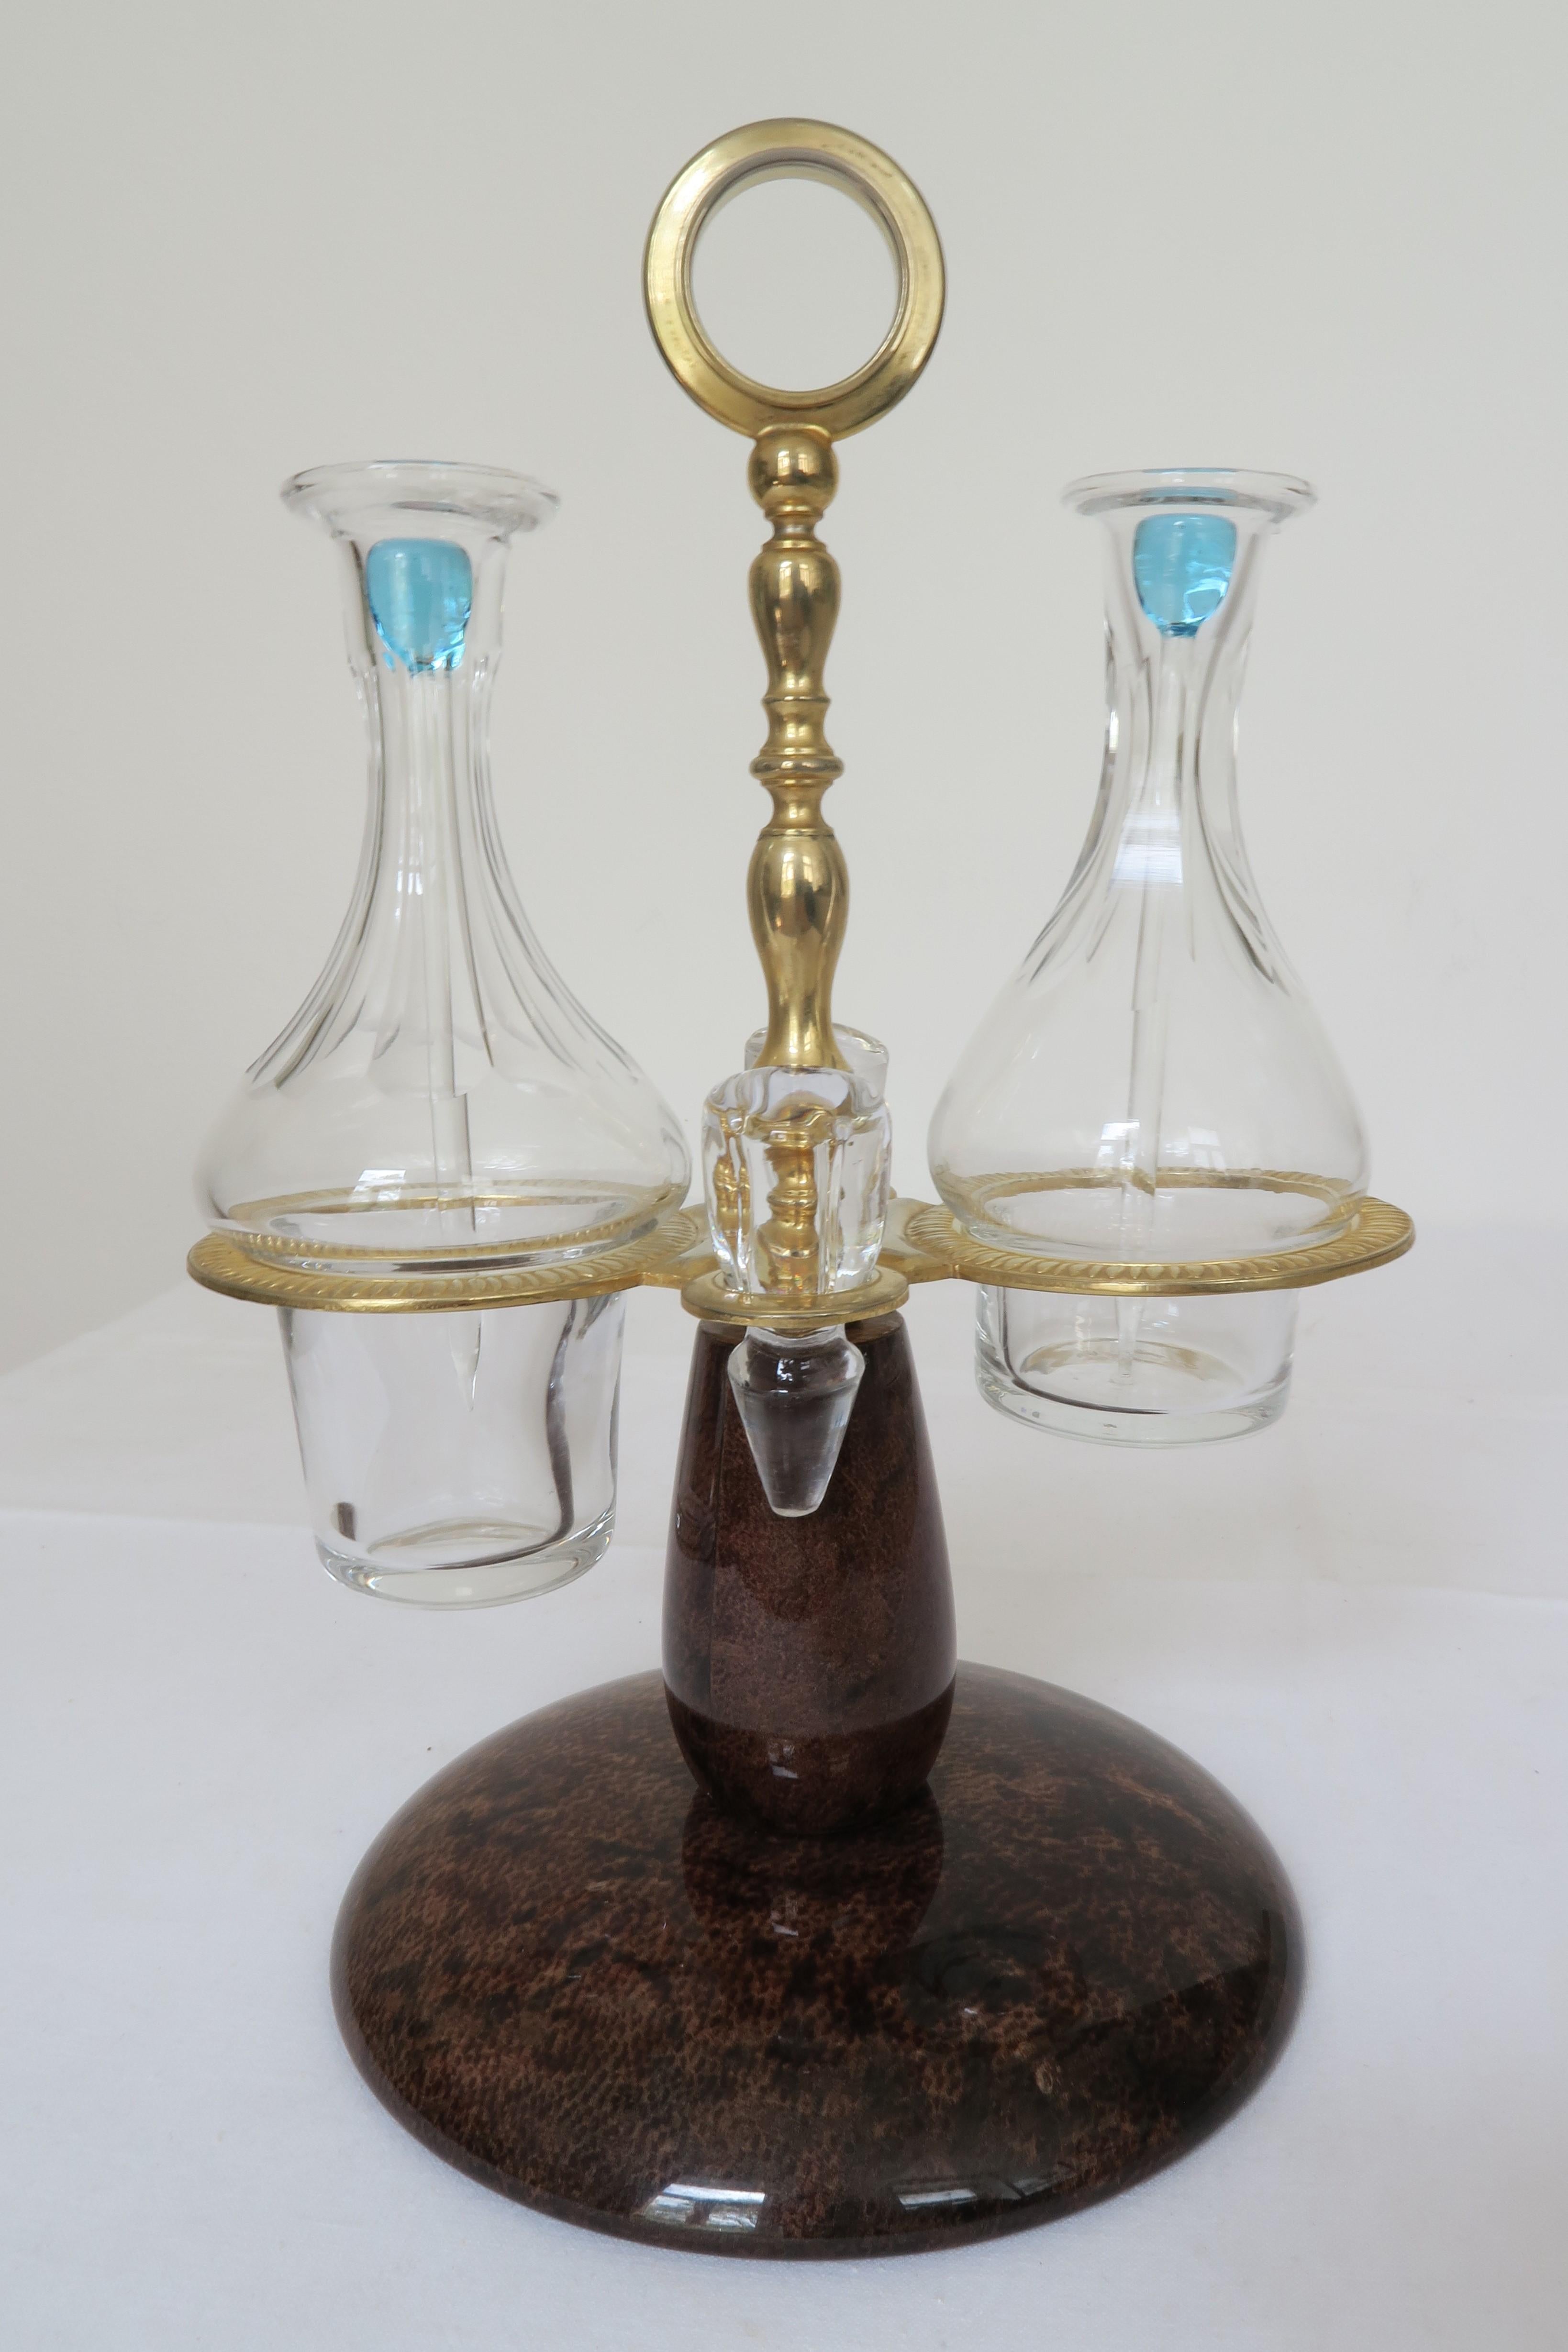 For sale is a beautiful and unique cruet stand by Italian creator Aldo Tura. It has a varnished brown leather foot with glowing brass hardware and cut glass pitchers for oil and vinegar. The pitchers can be closed with cut glass stoppers or can be